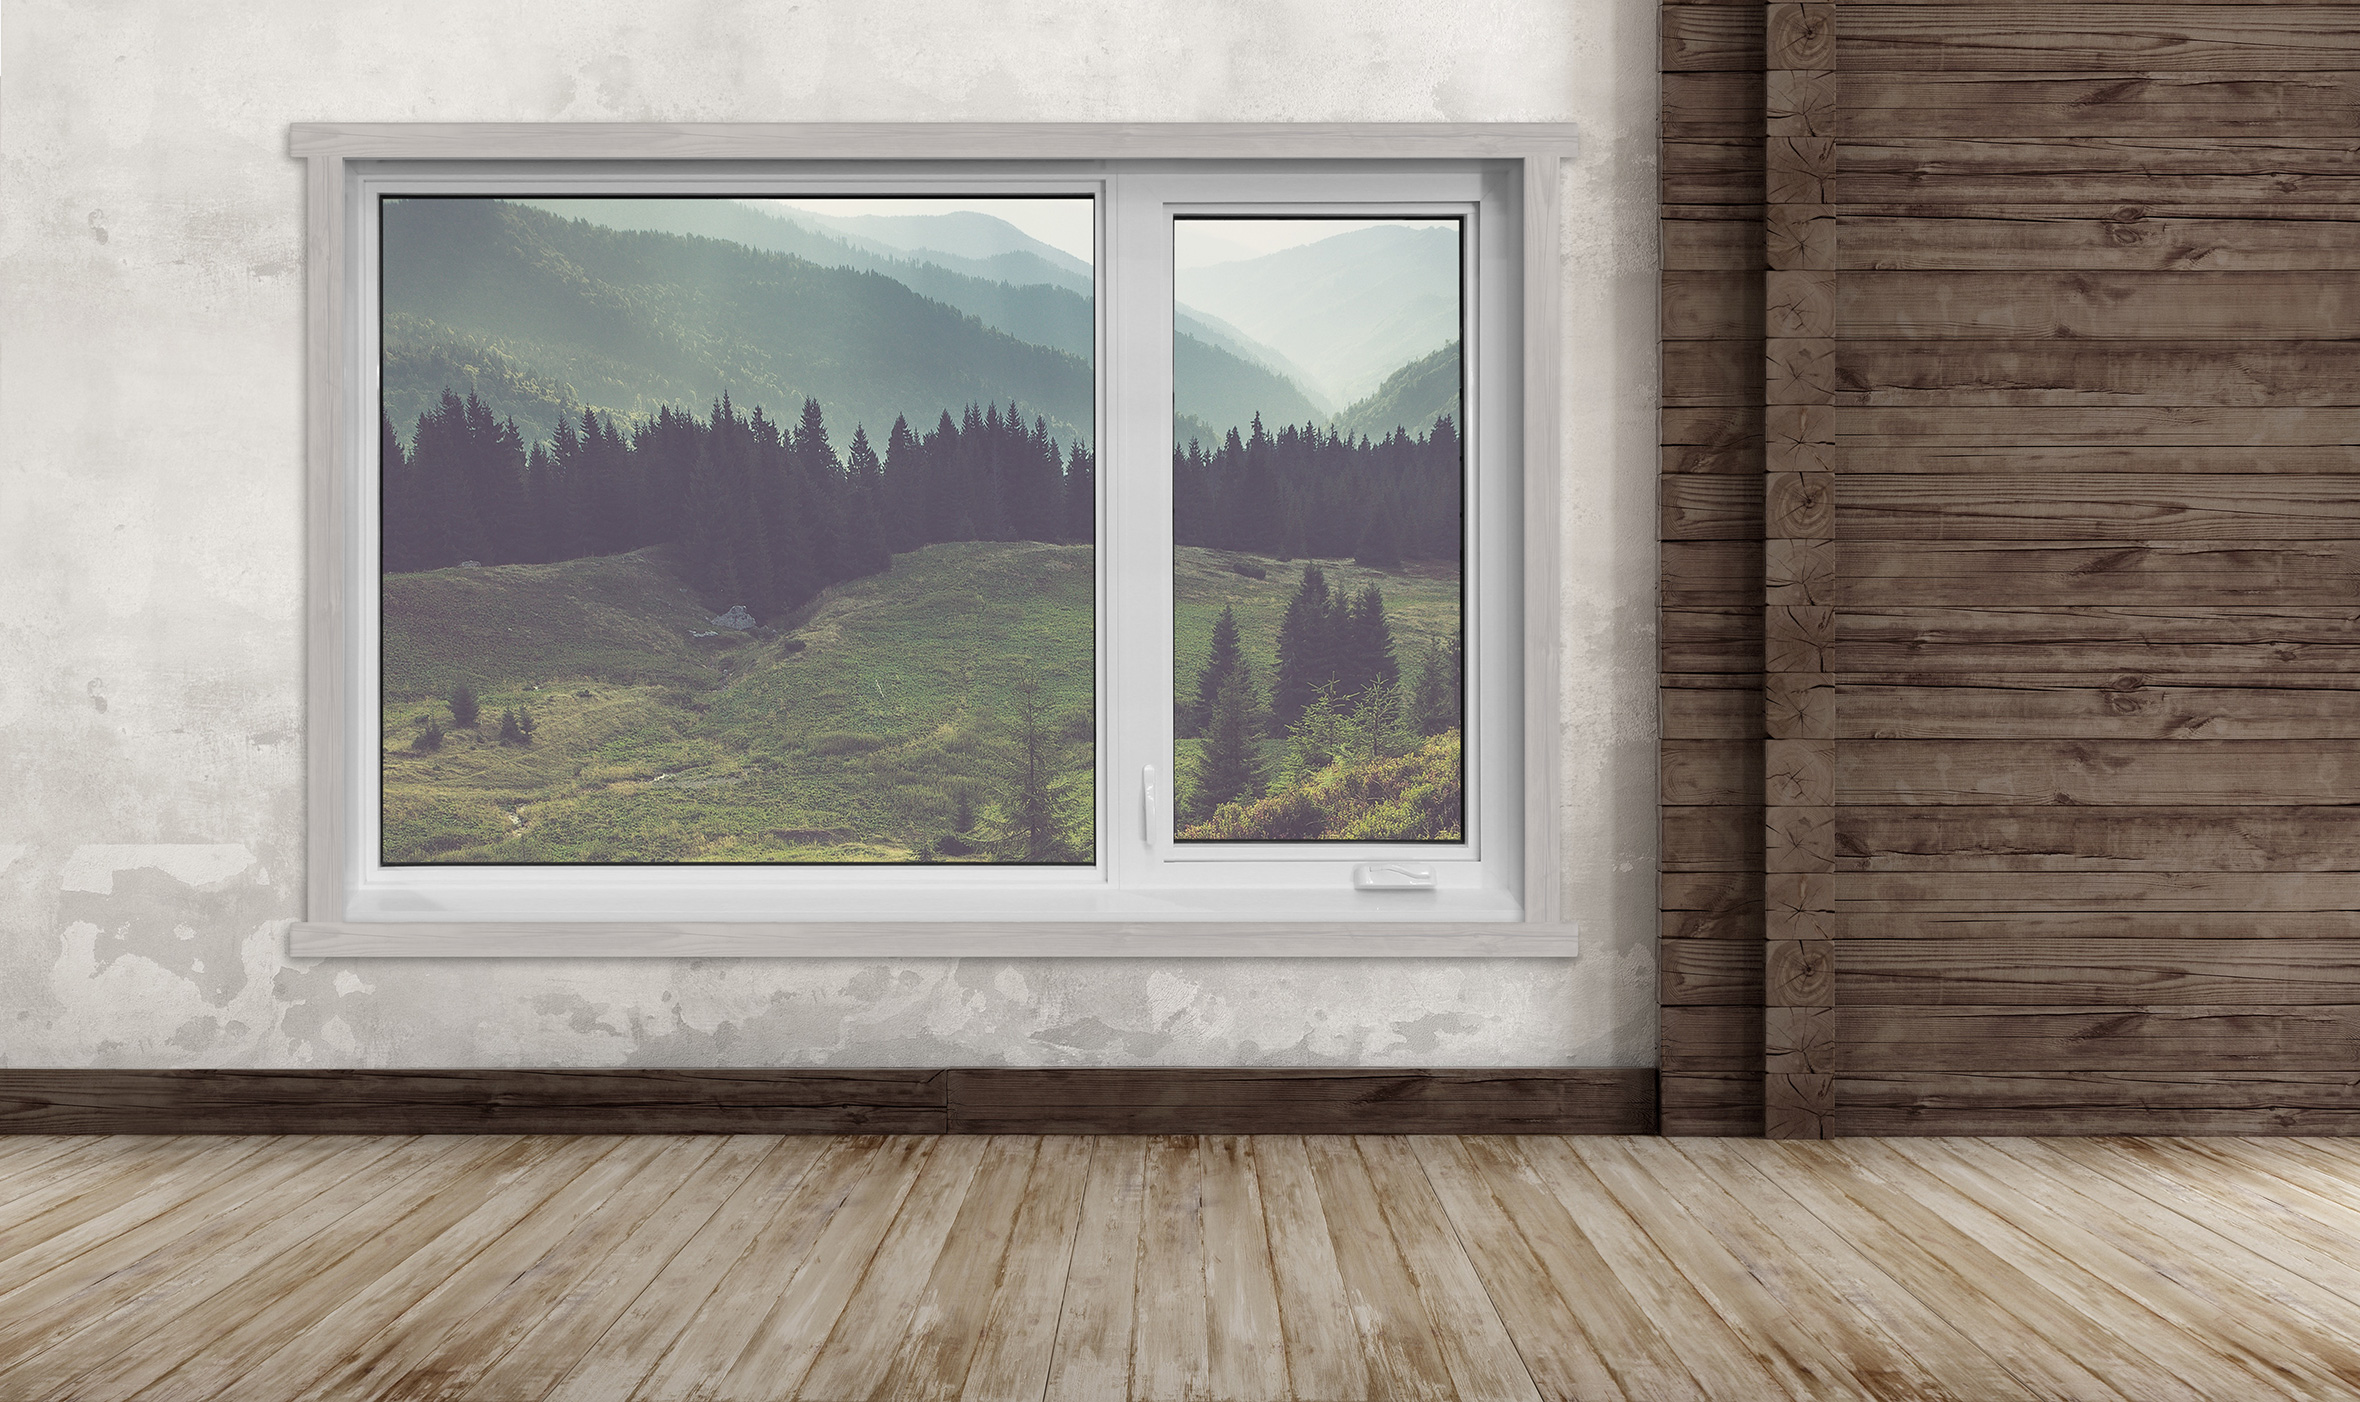 Terrano window in a rusting room, overlooking a mountain valley.